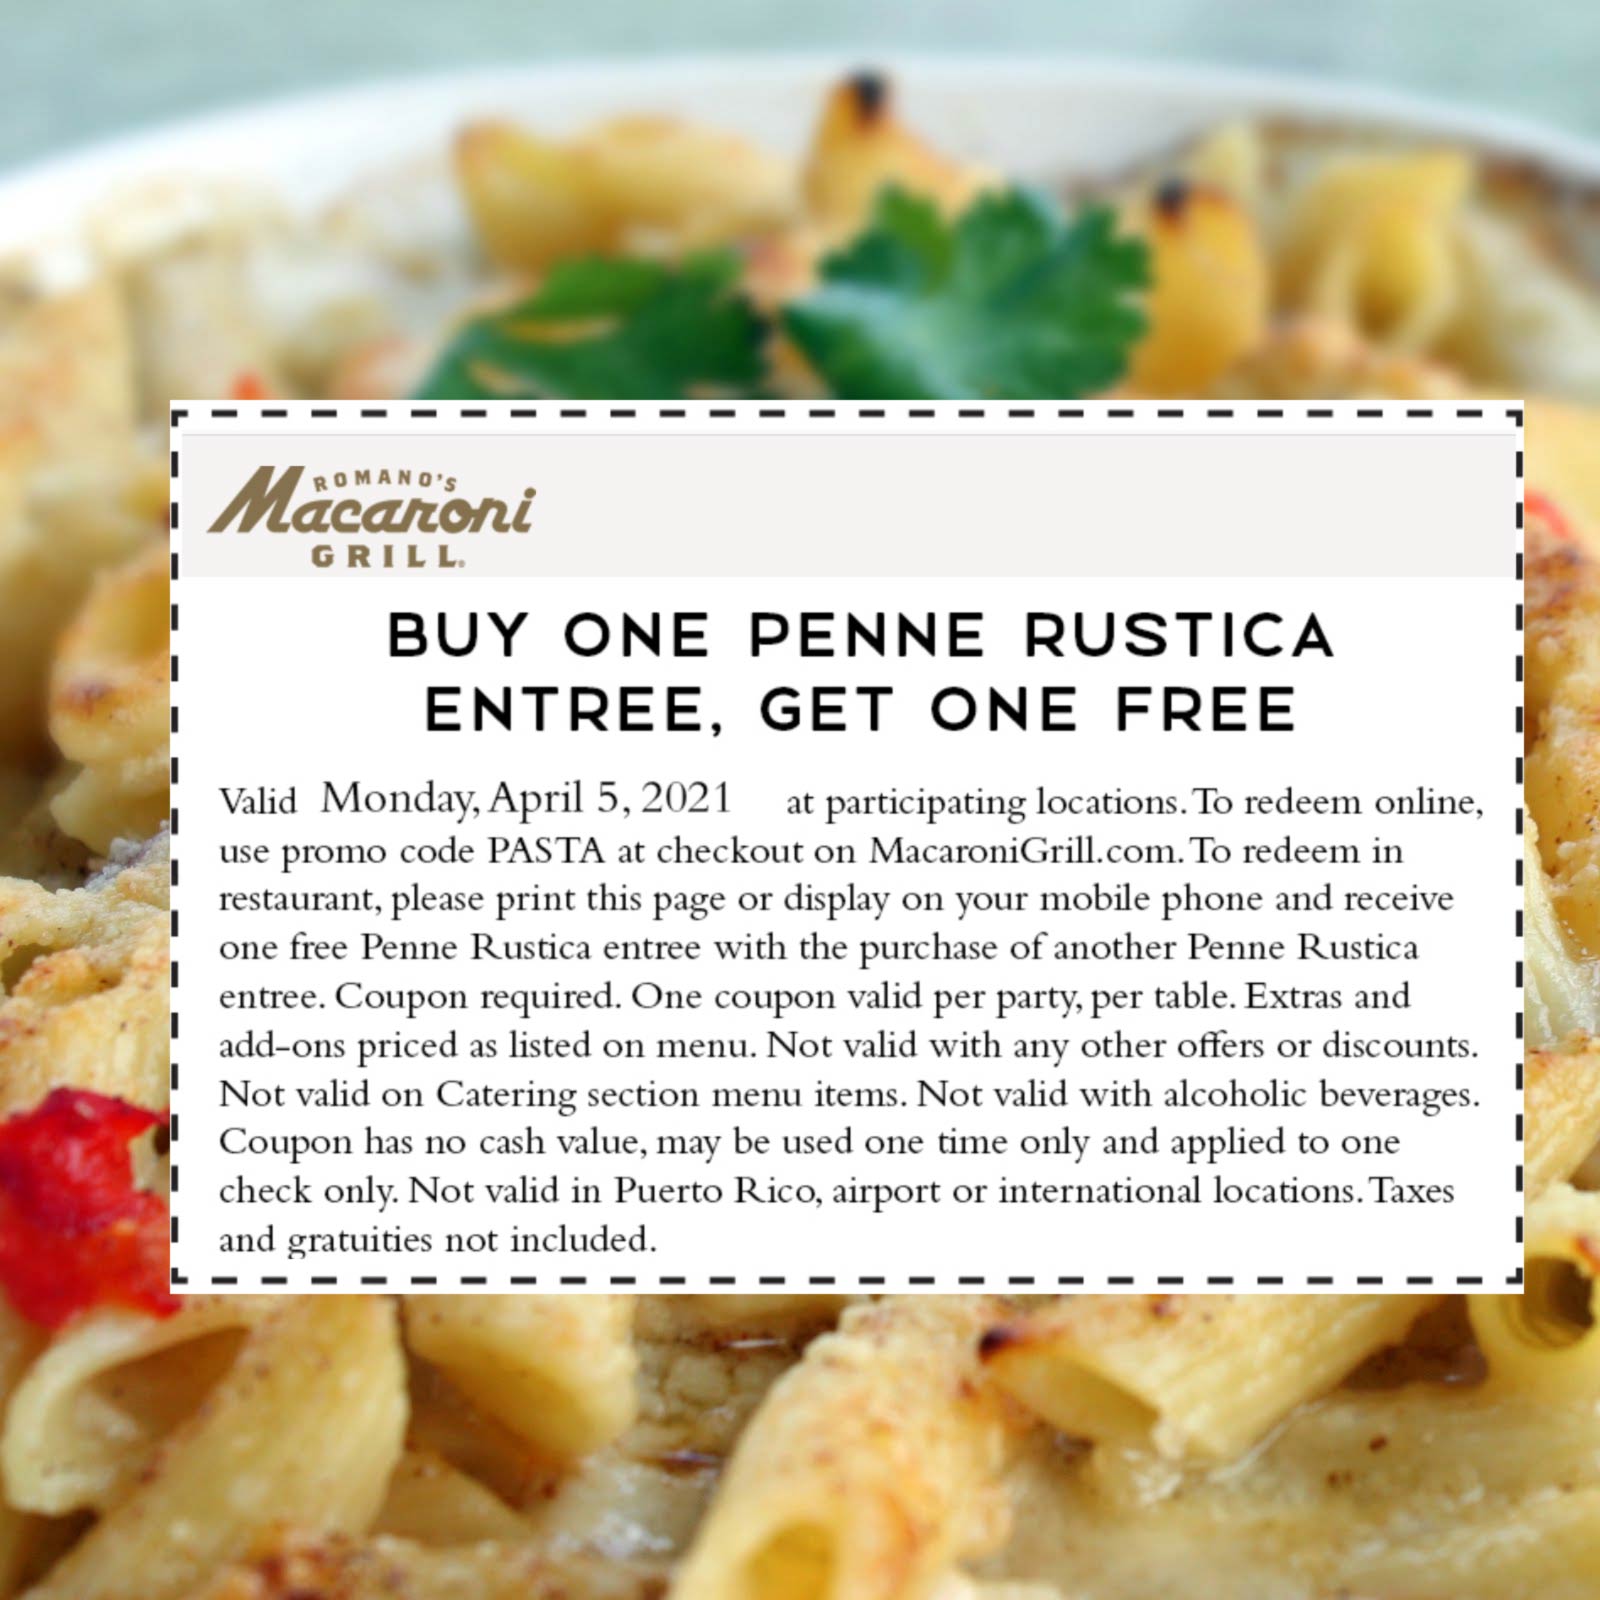 Macaroni Grill restaurants Coupon  Second penne rustica entree free today at Macaroni Grill #macaronigrill 